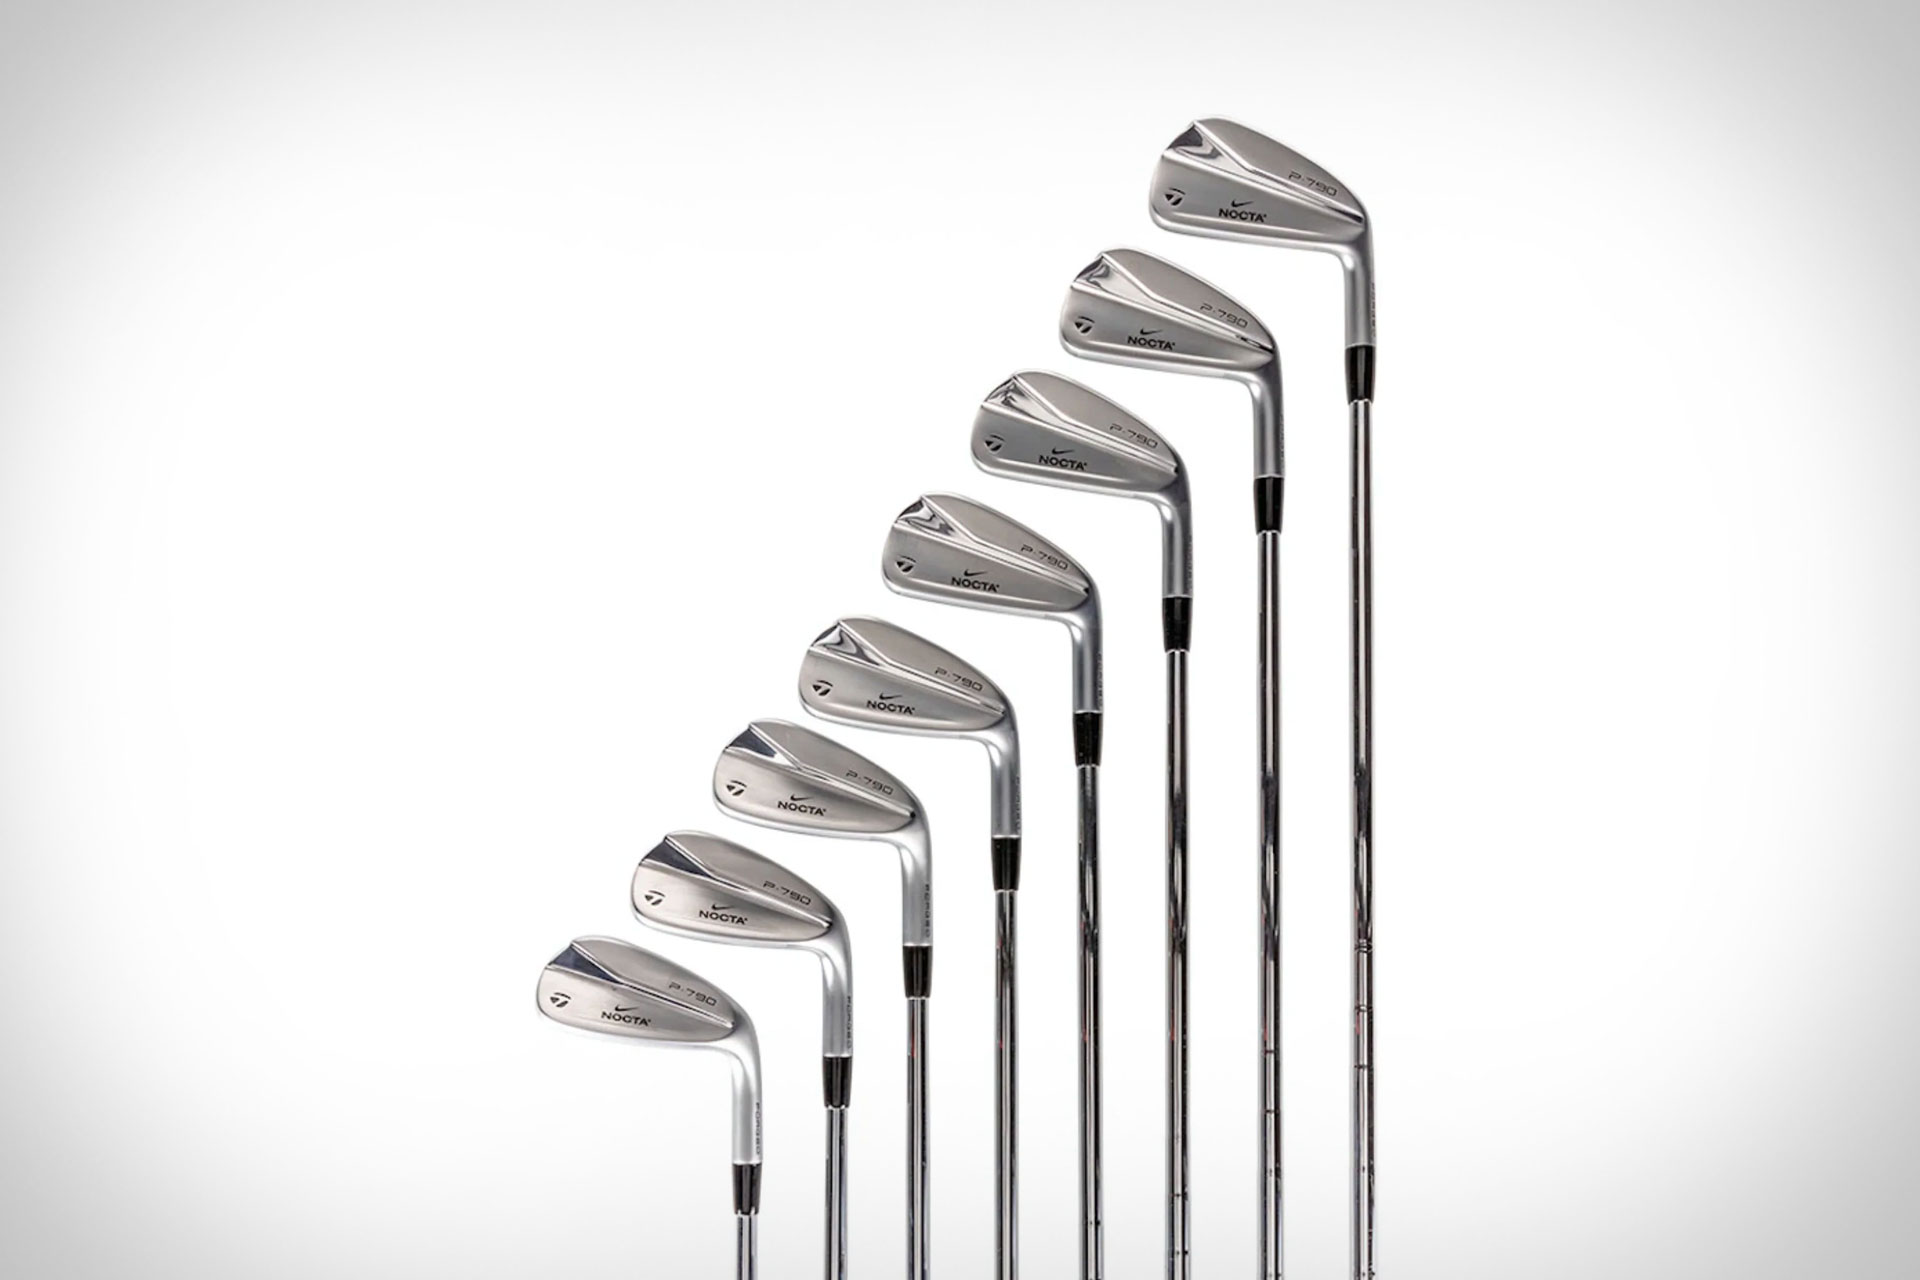 Nike Nocta TaylorMade P790 Irons | Uncrate